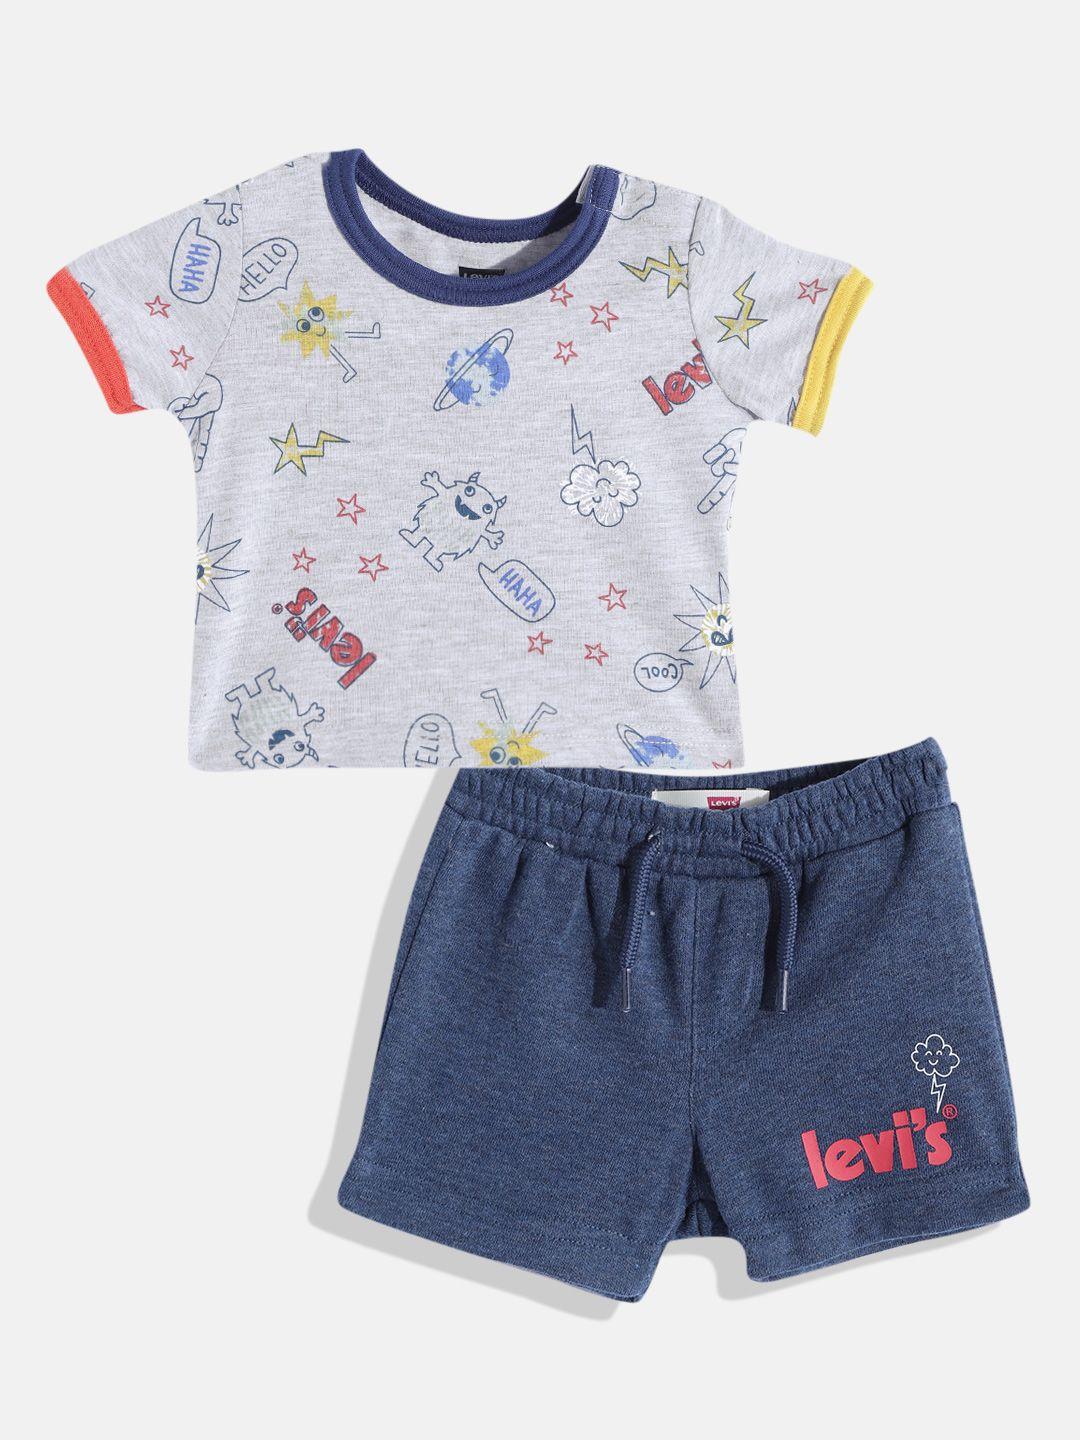 levis infant boys grey & navy blue printed t-shirt with shorts